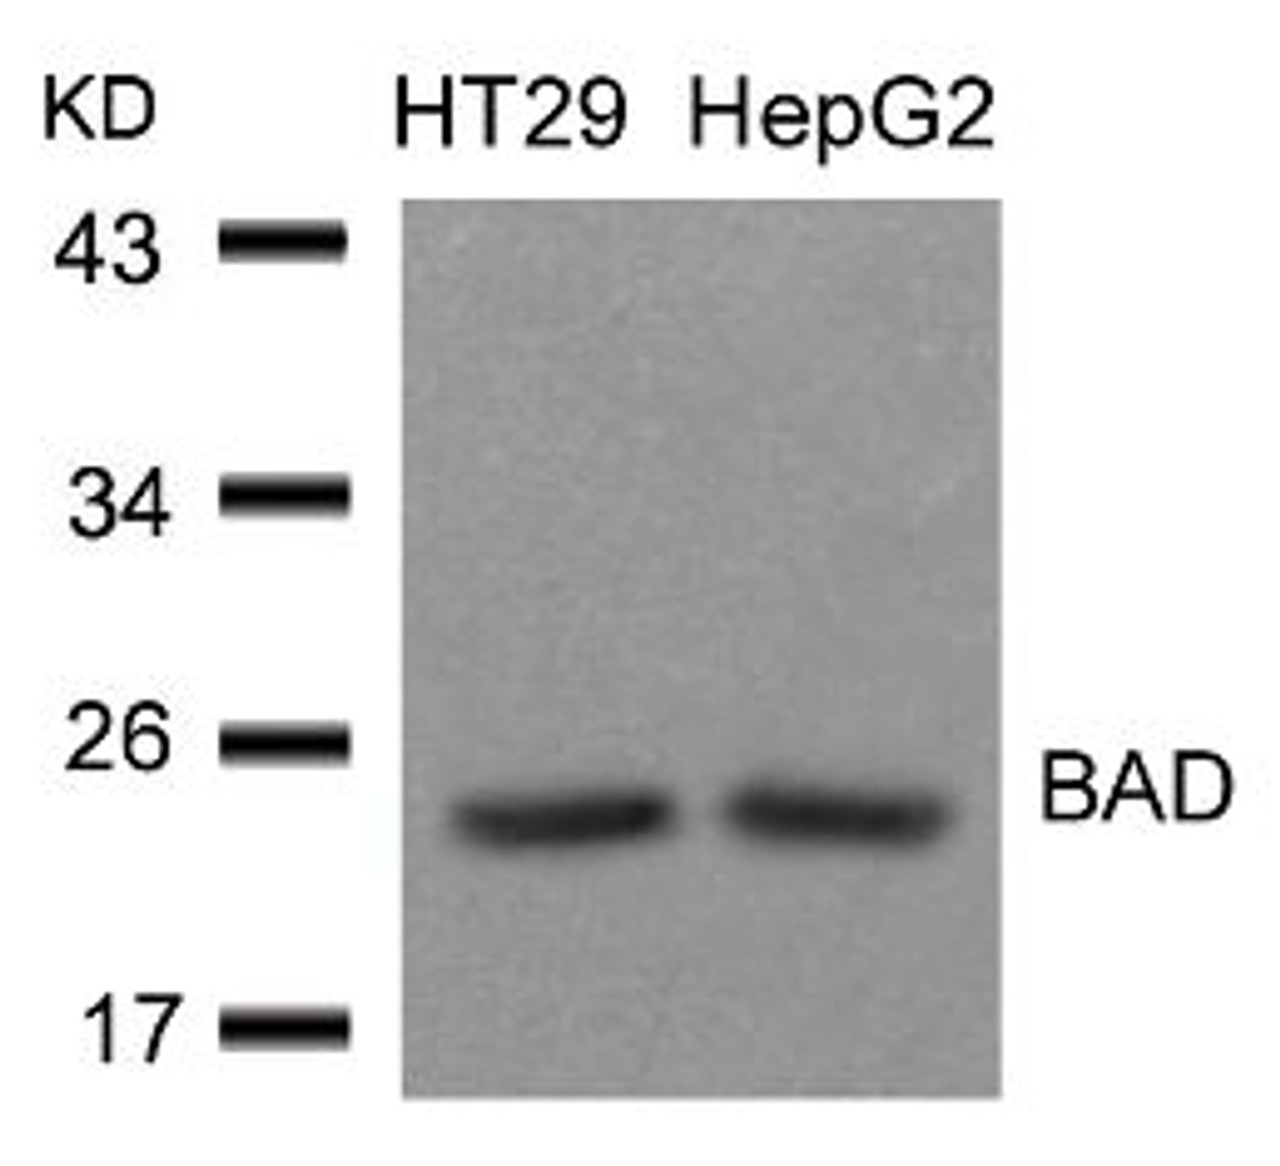 Western blot analysis of lysed extracts from HT29 and HepG2 cells using BAD (Ab-136) .